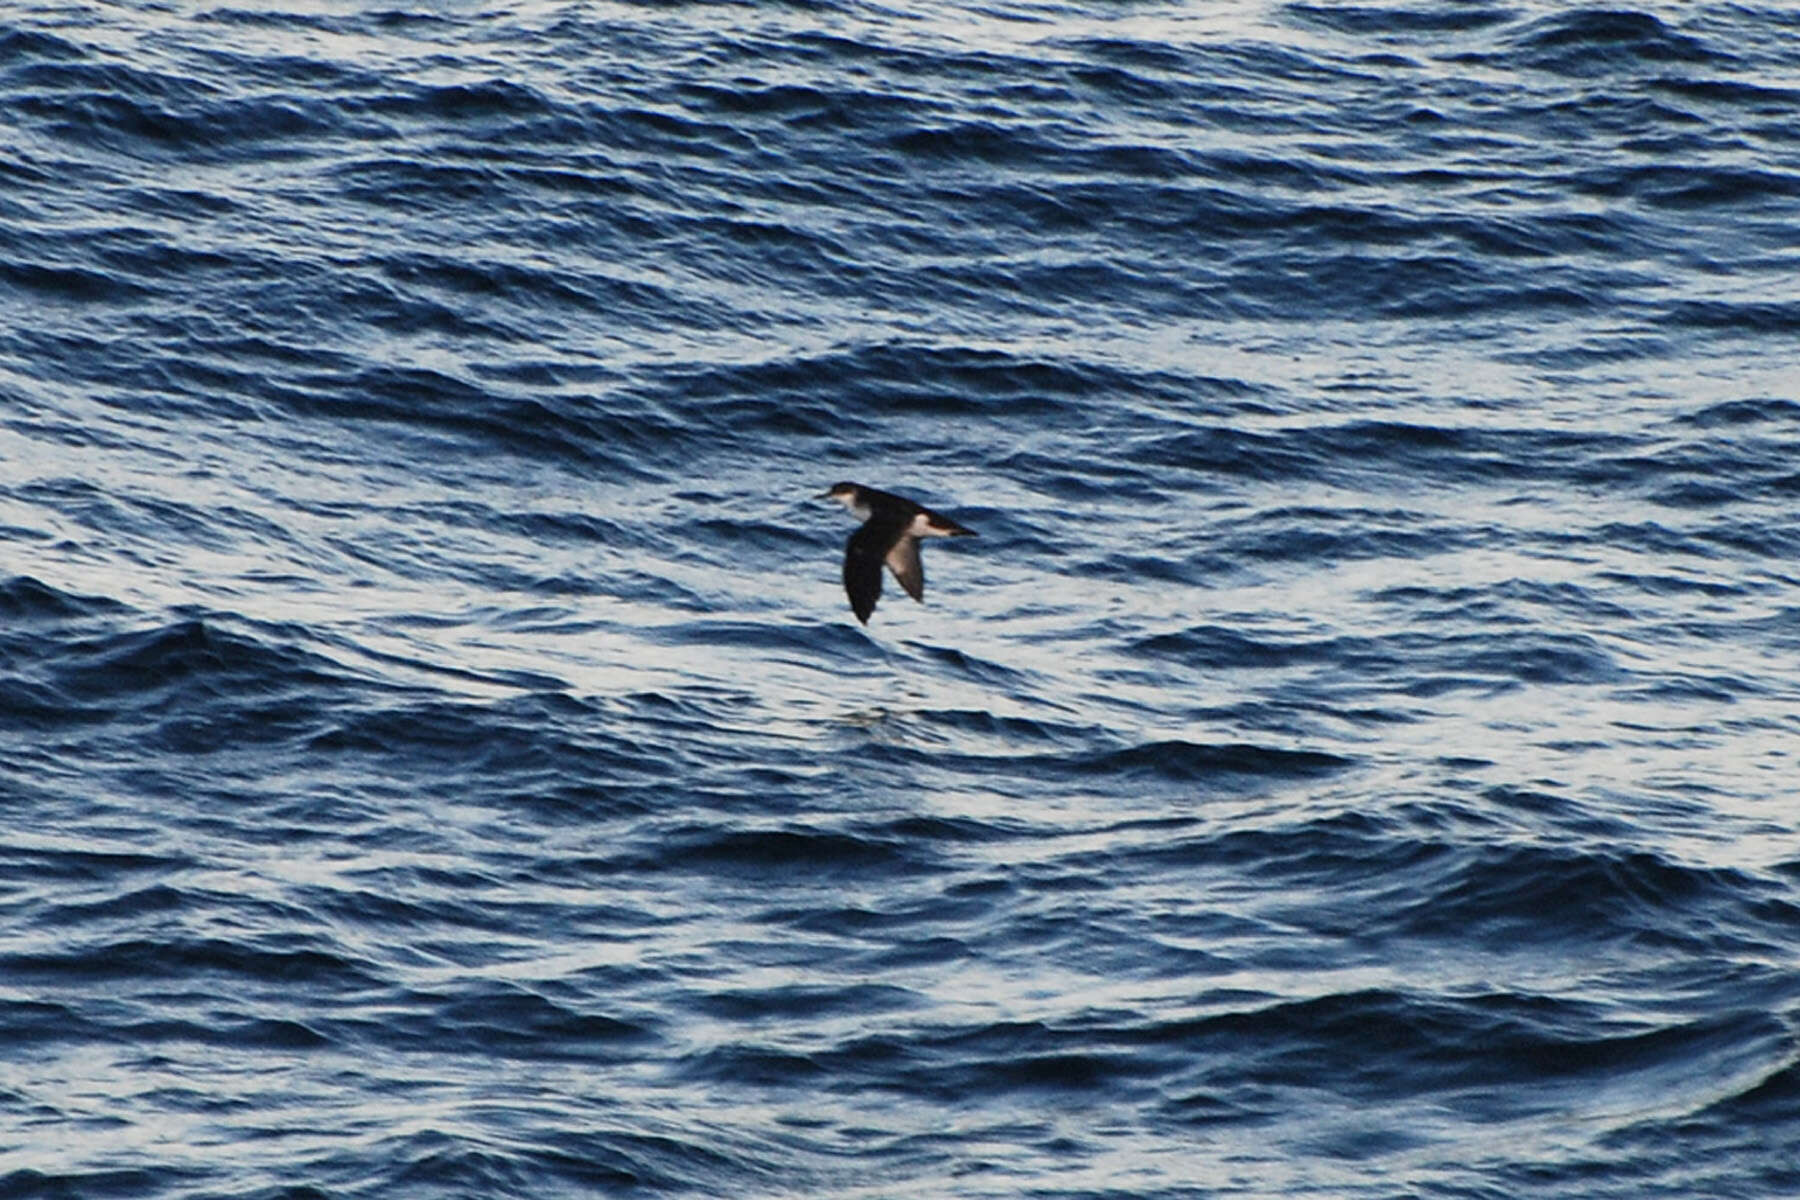 Image of Townsend's Shearwater